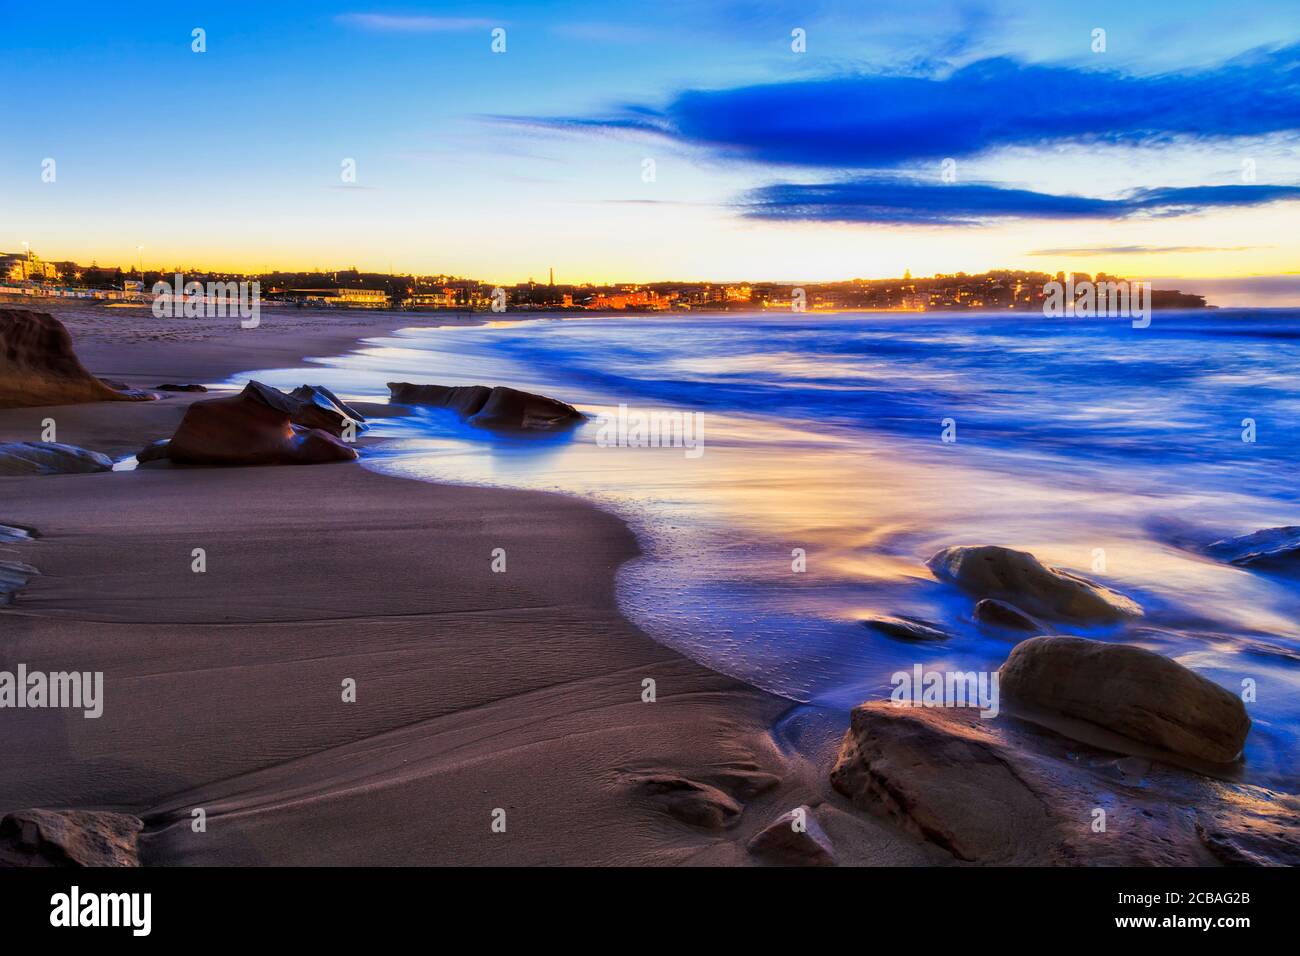 Sands and rocks of Bondi beach in Sydney at sunrise with blurred waves and waterfront of residential houses on North Bondi head. Stock Photo